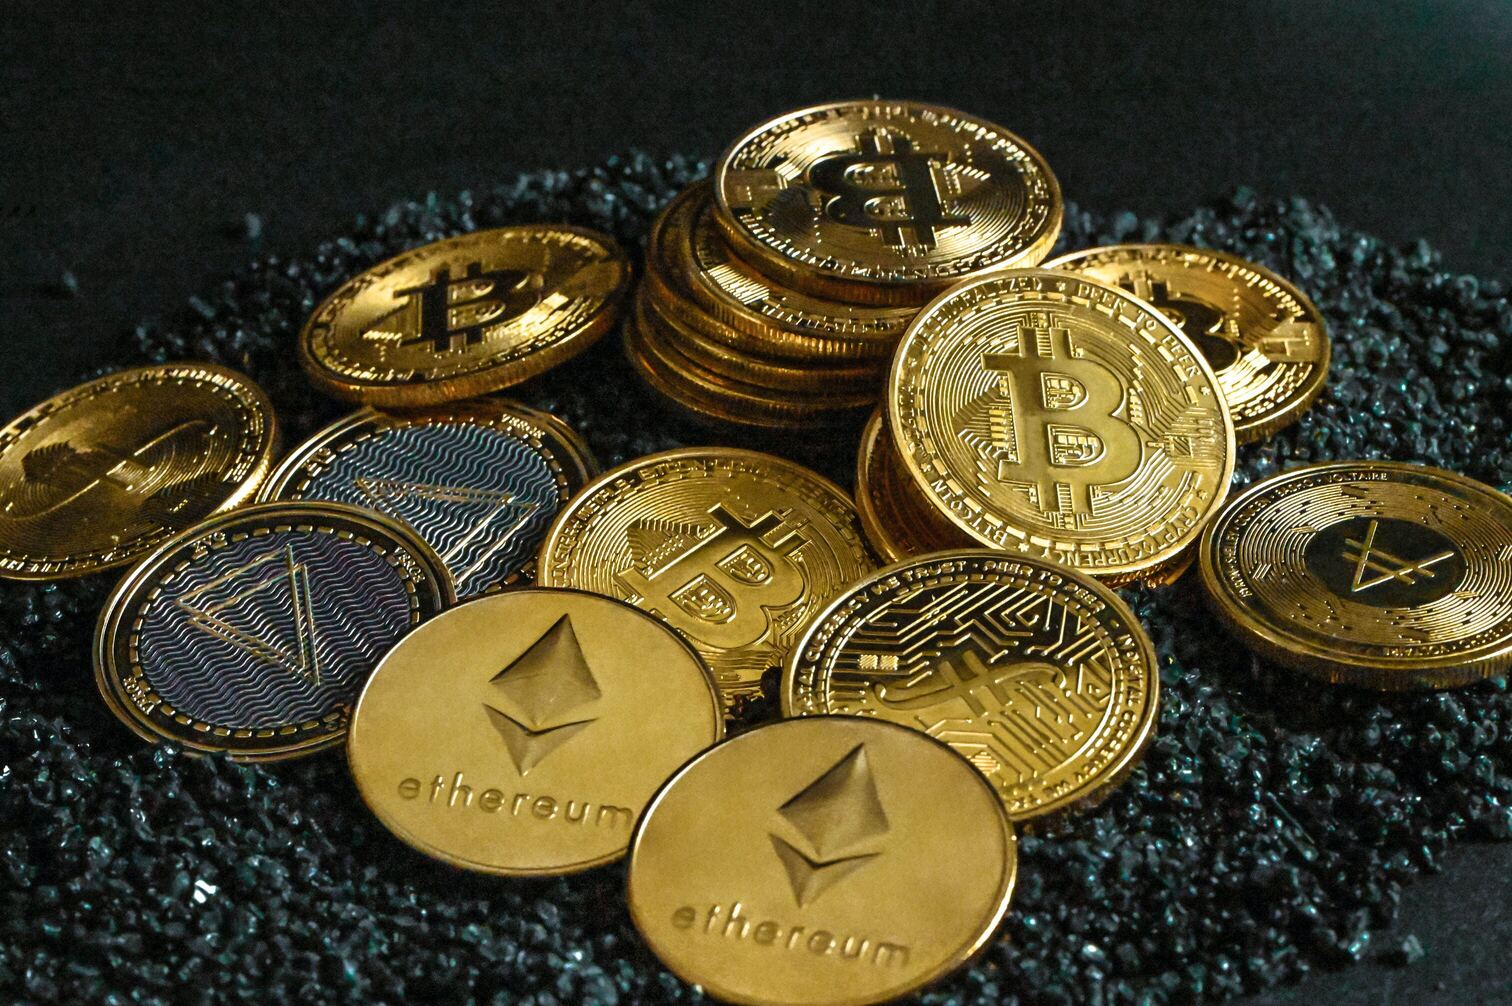 Gold cryptocurrency coins.